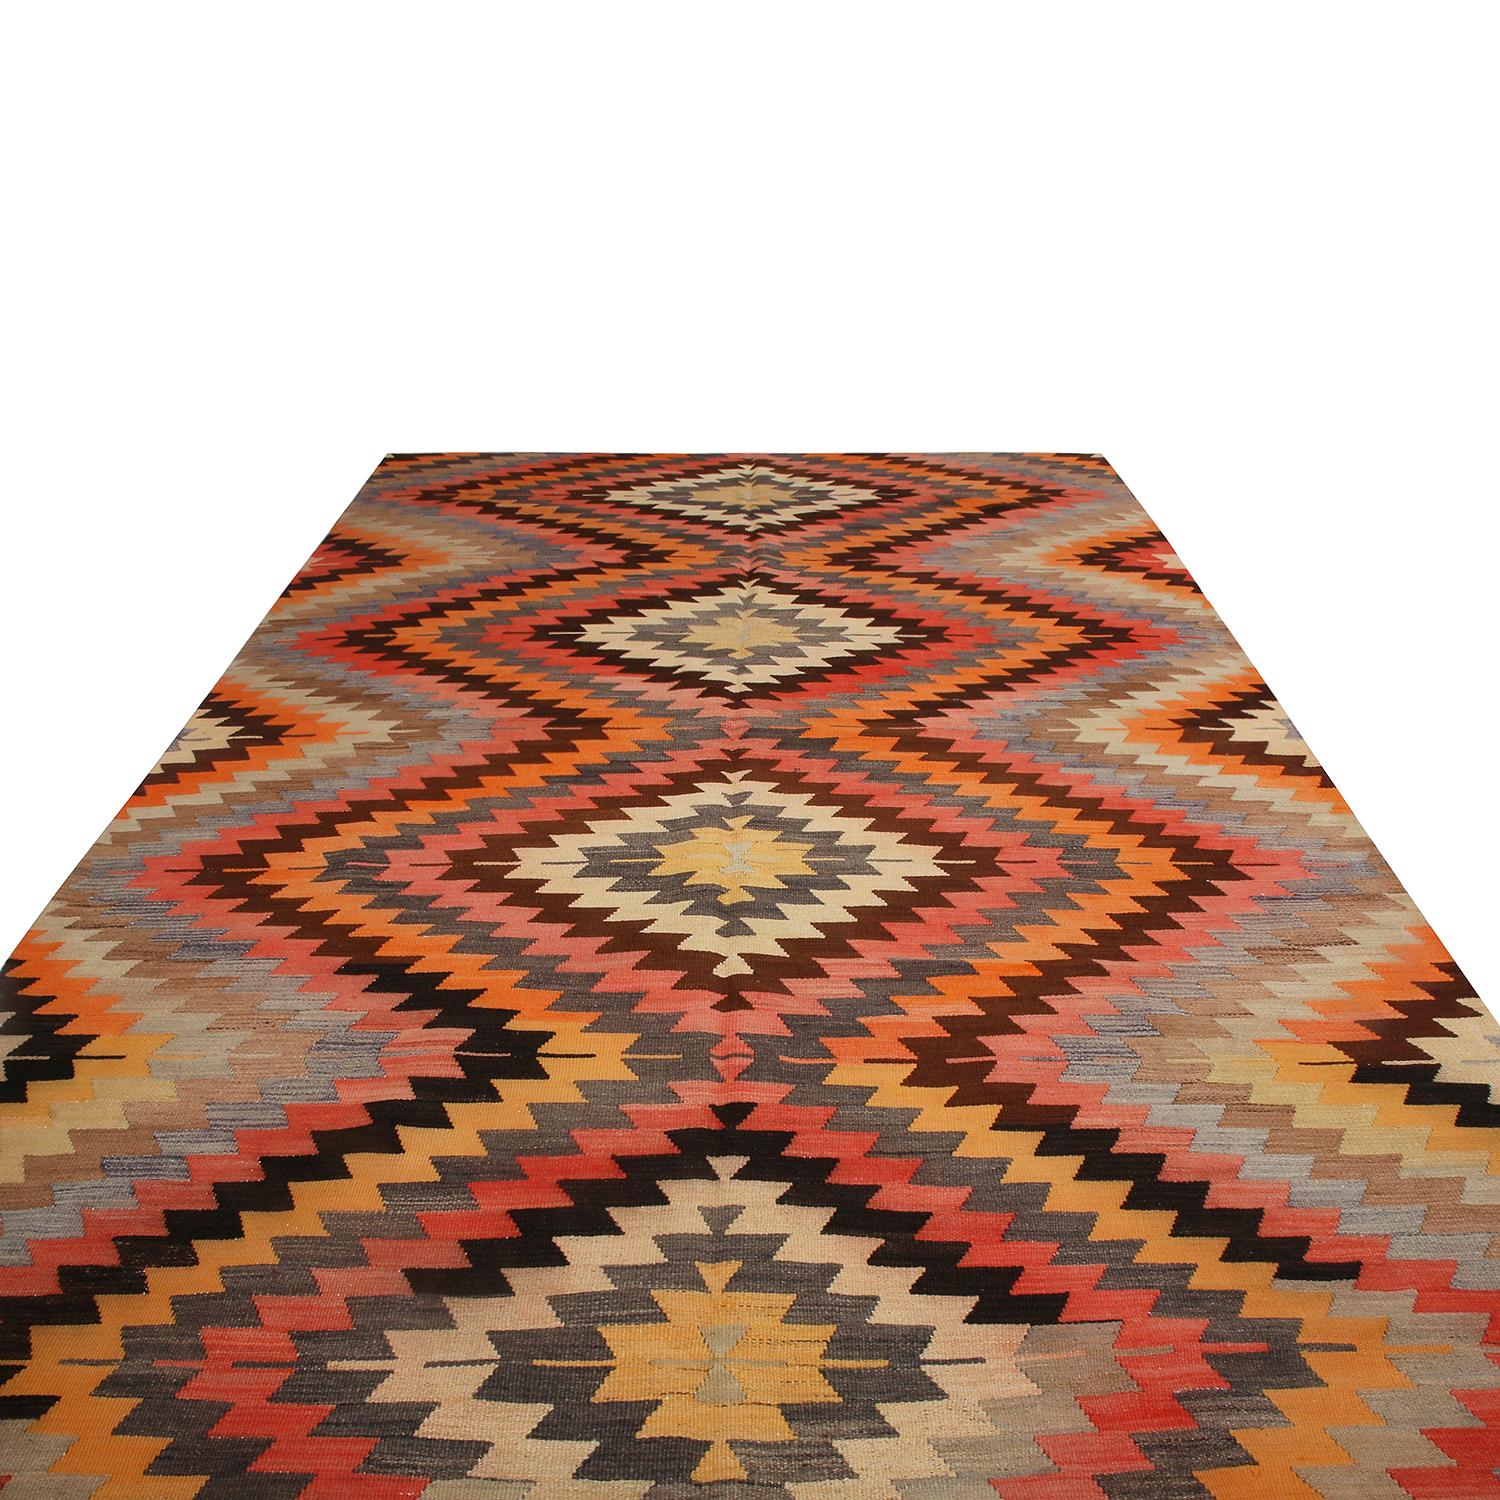 Flat-woven in Turkey originating between 1950-1960, this vintage midcentury tribal Kilim hails from the province of Afyon, celebrating a very idyllic but lively approach to tribal colorway with hues of orange, yellow, pink, black, blue, and beige in